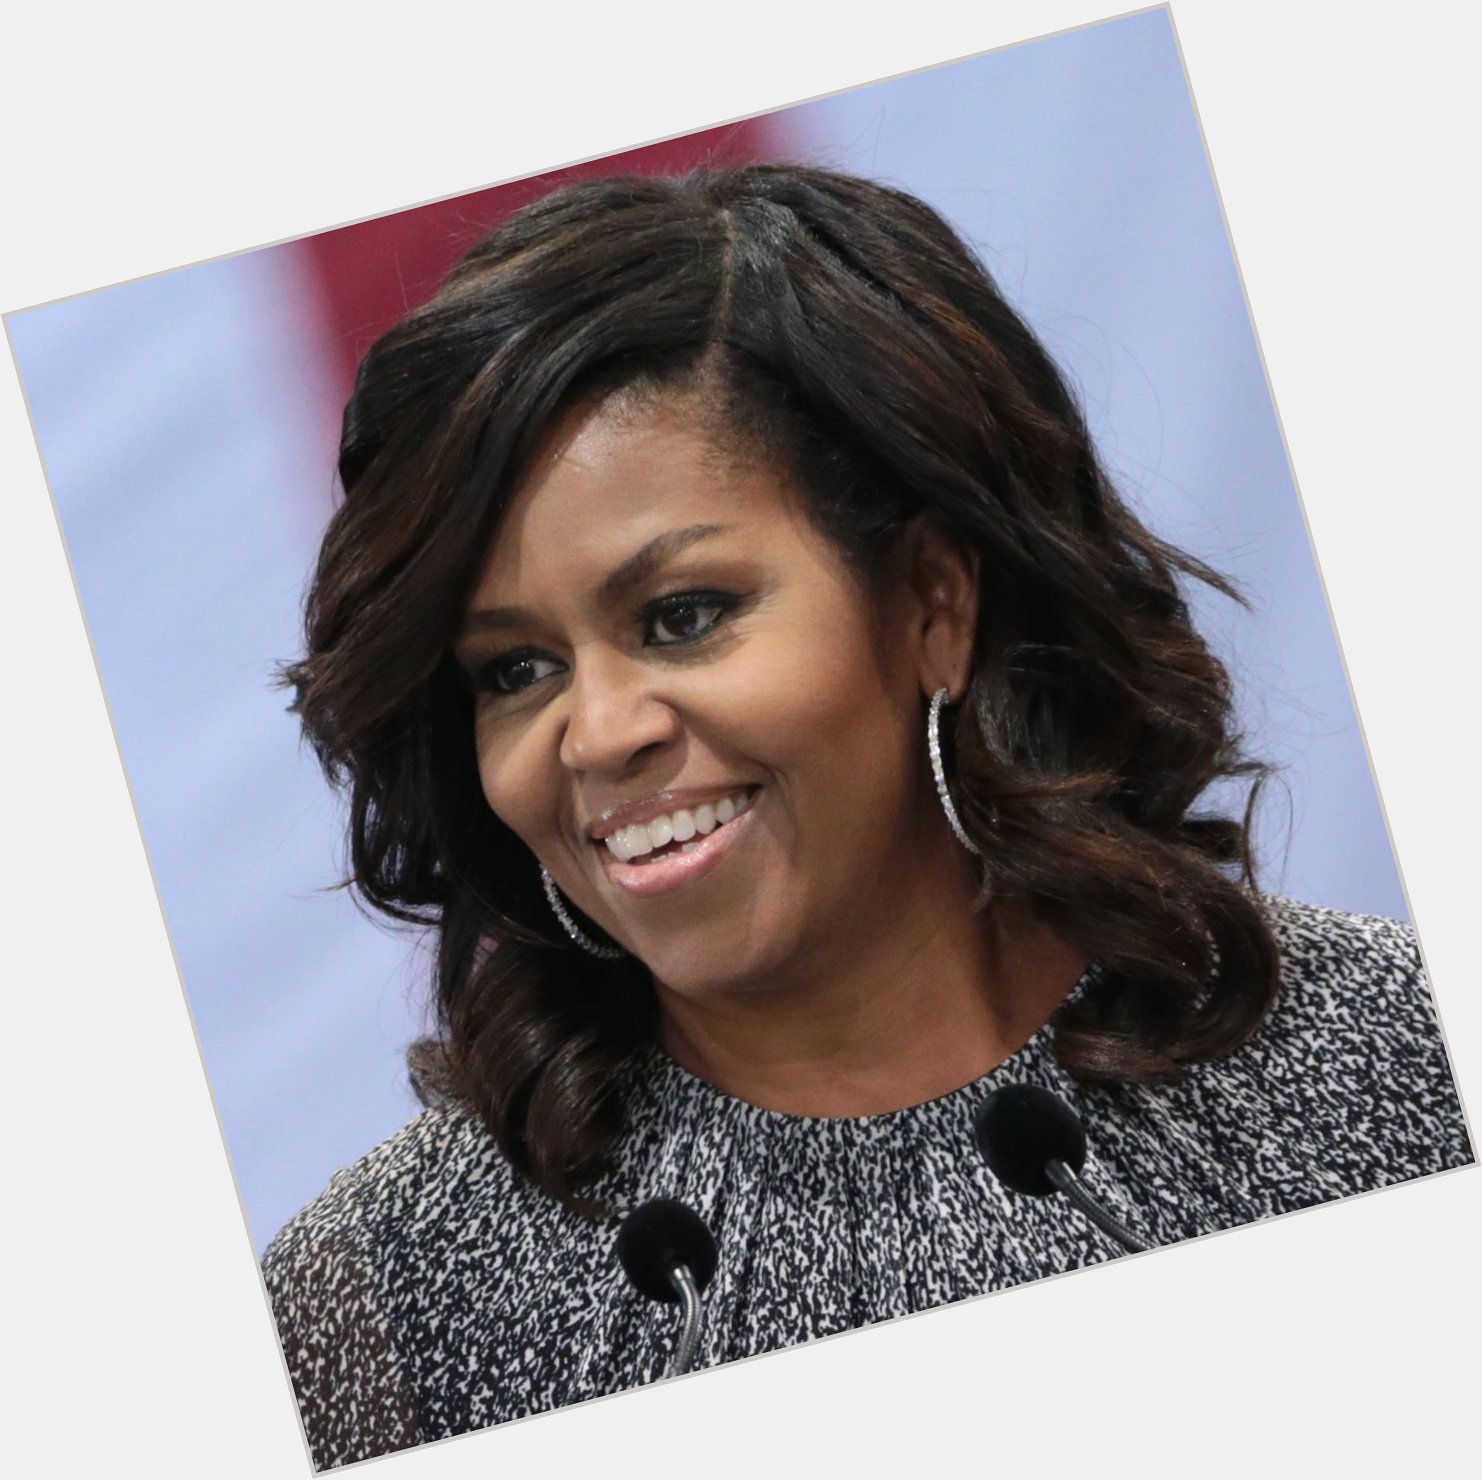 Happy birthday to former First Lady Michelle Obama!

Your work has changed countless lives. Enjoy your special day. 